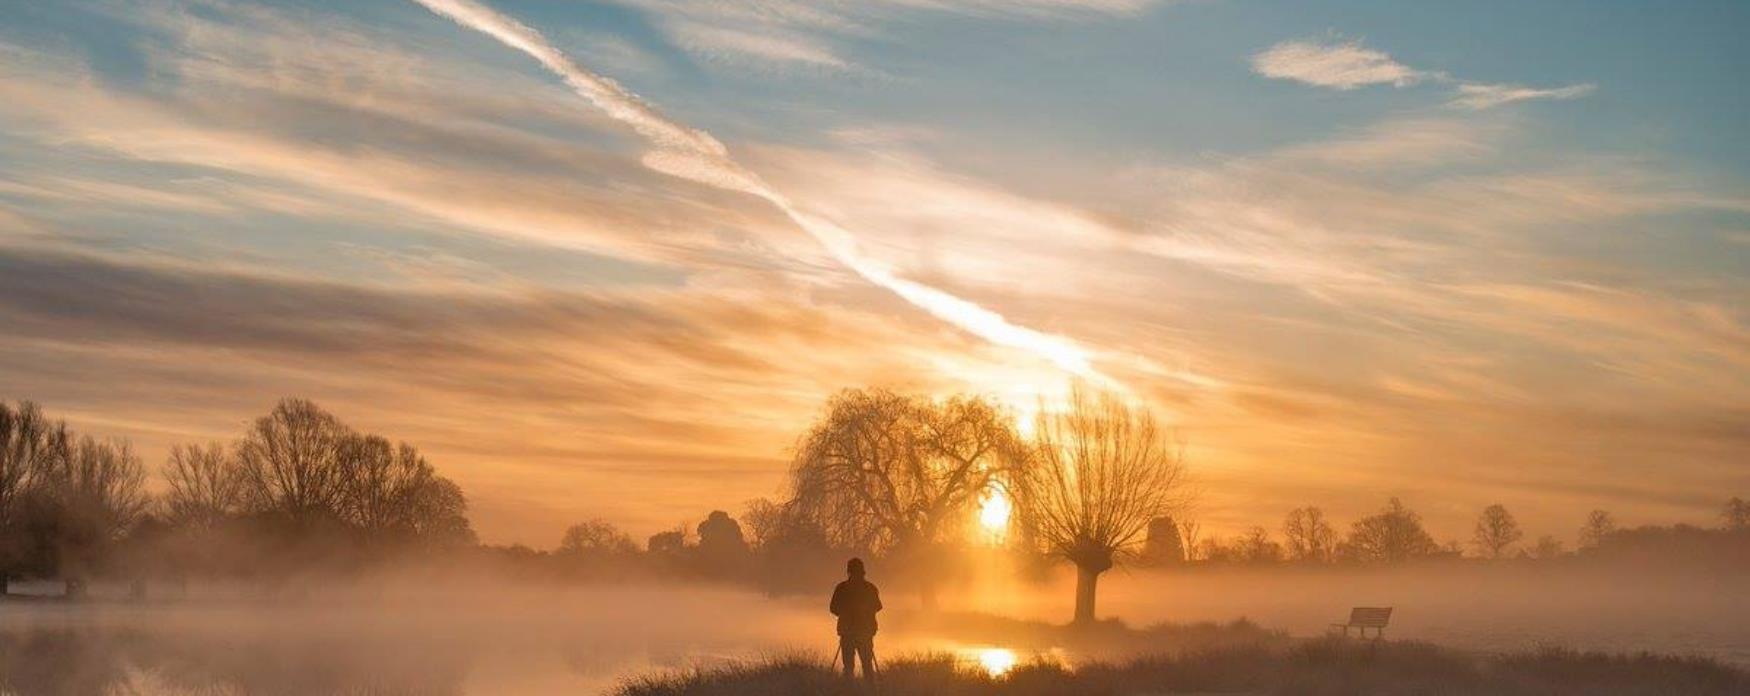 Stunning picture of a man exploring Richmond Park very early in the morning